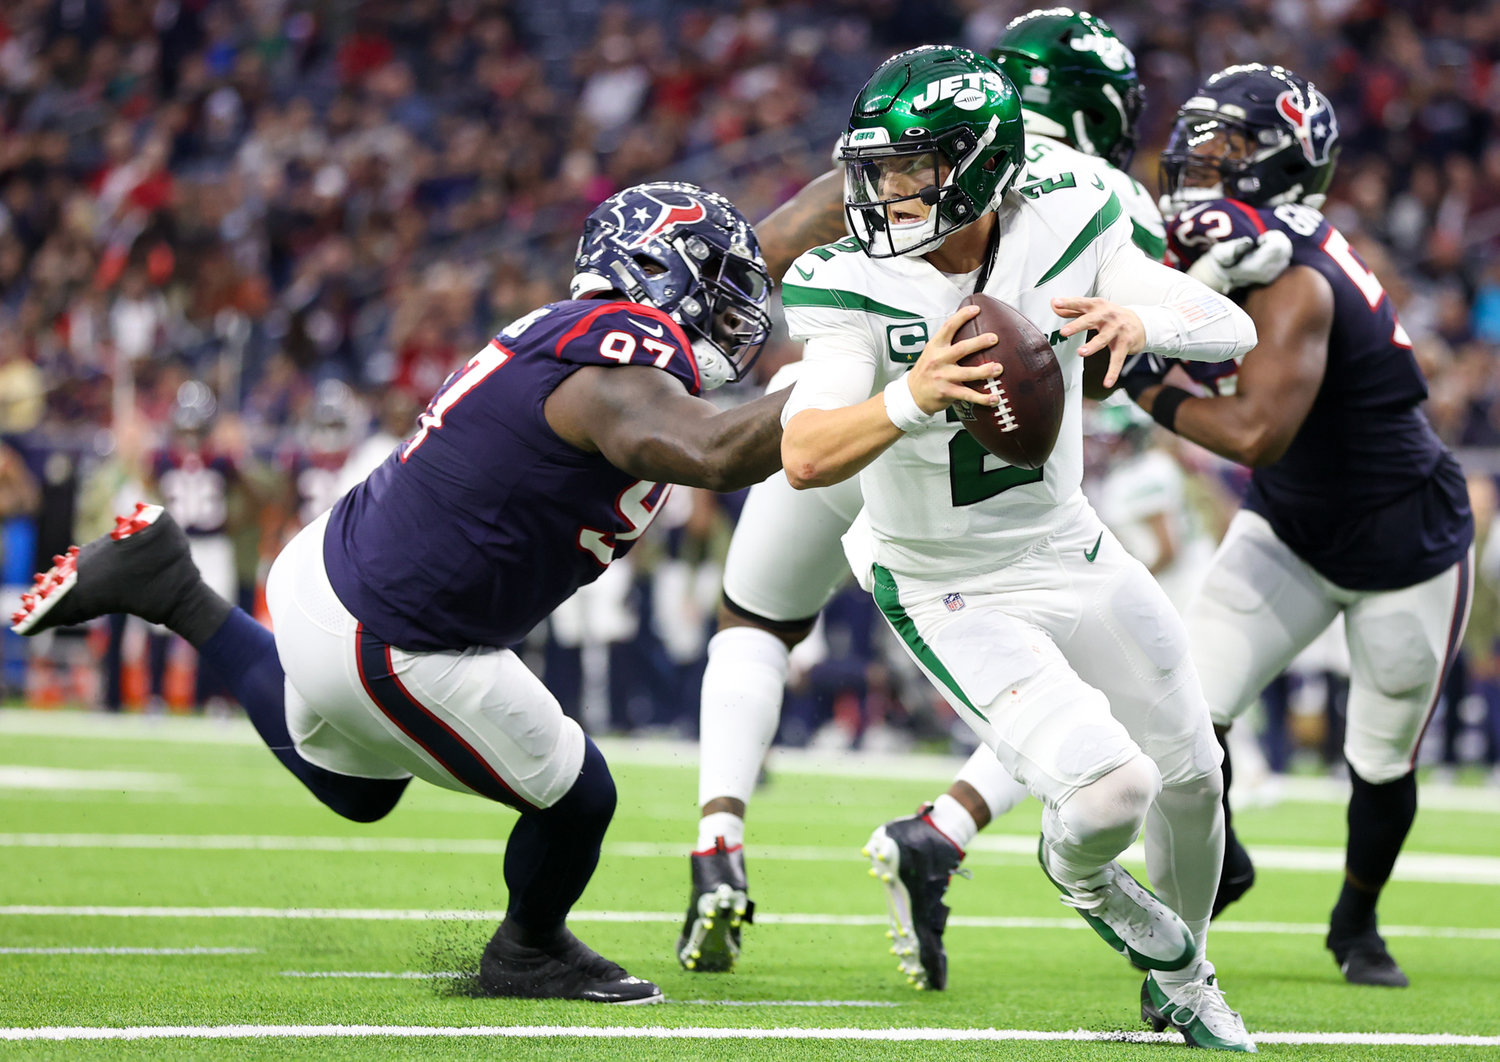 New York Jets quarterback Zach Wilson (2) eludes Houston Texans defensive tackle Maliek Collins (97) to avoid a sack during an NFL game between the Houston Texans and the New York Jets on November 28, 2021 in Houston, Texas. The Jets won, 21-14